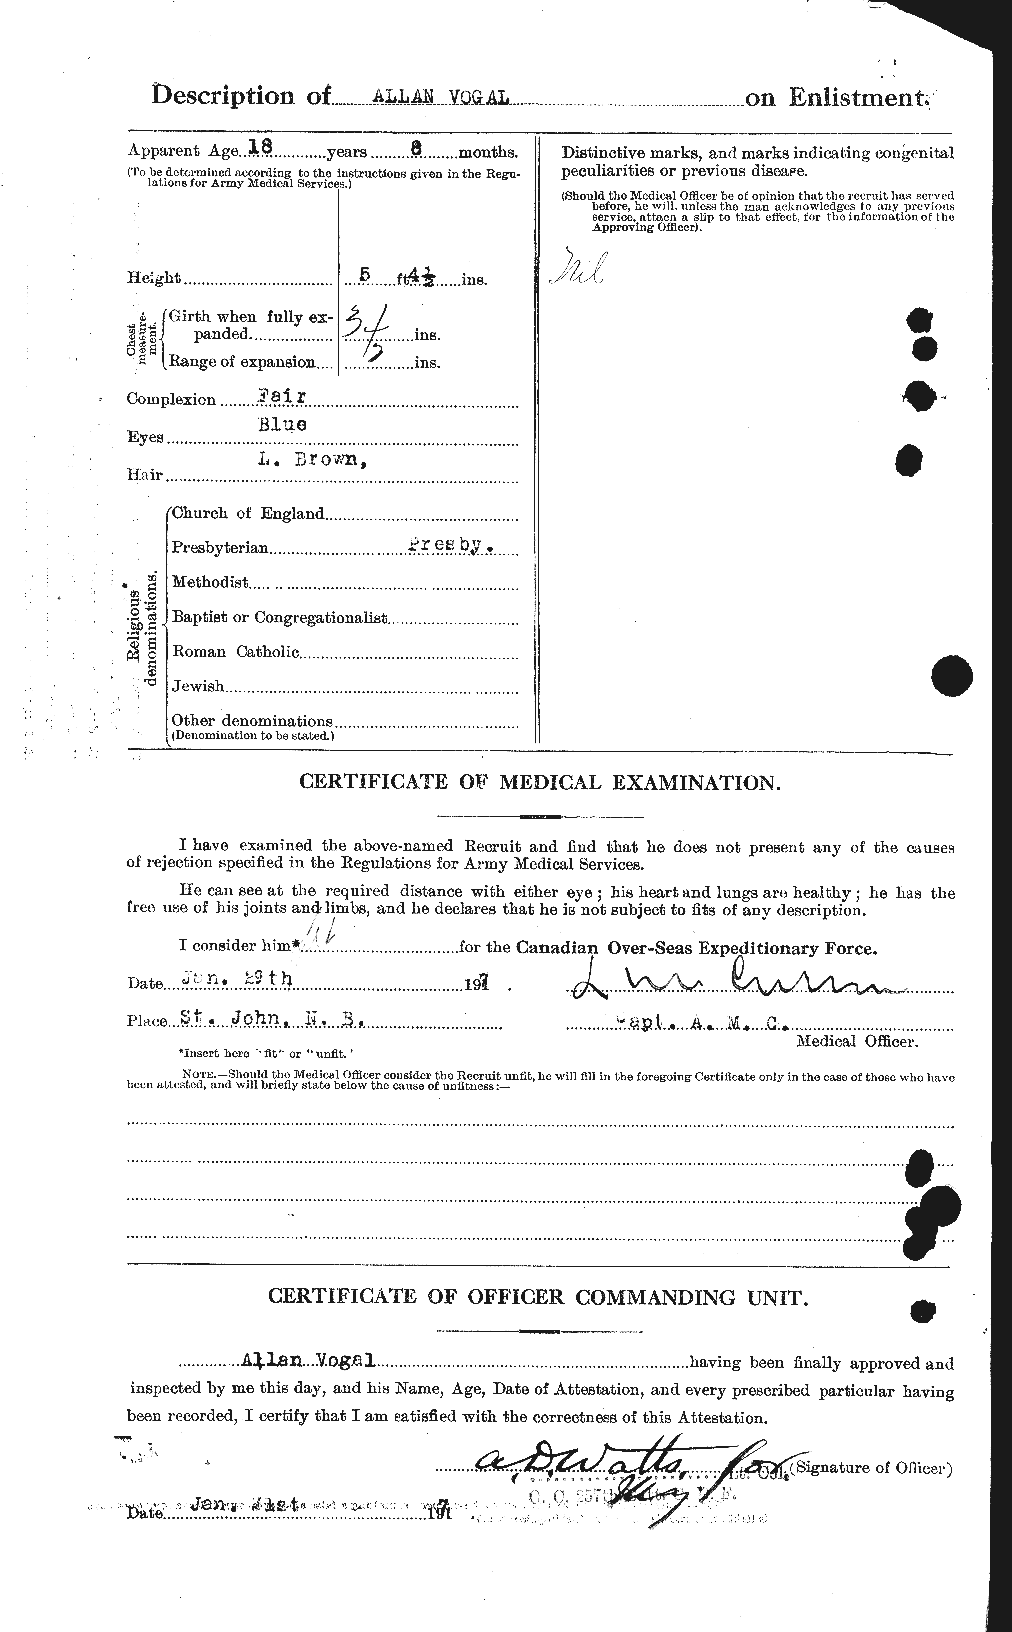 Personnel Records of the First World War - CEF 650575b